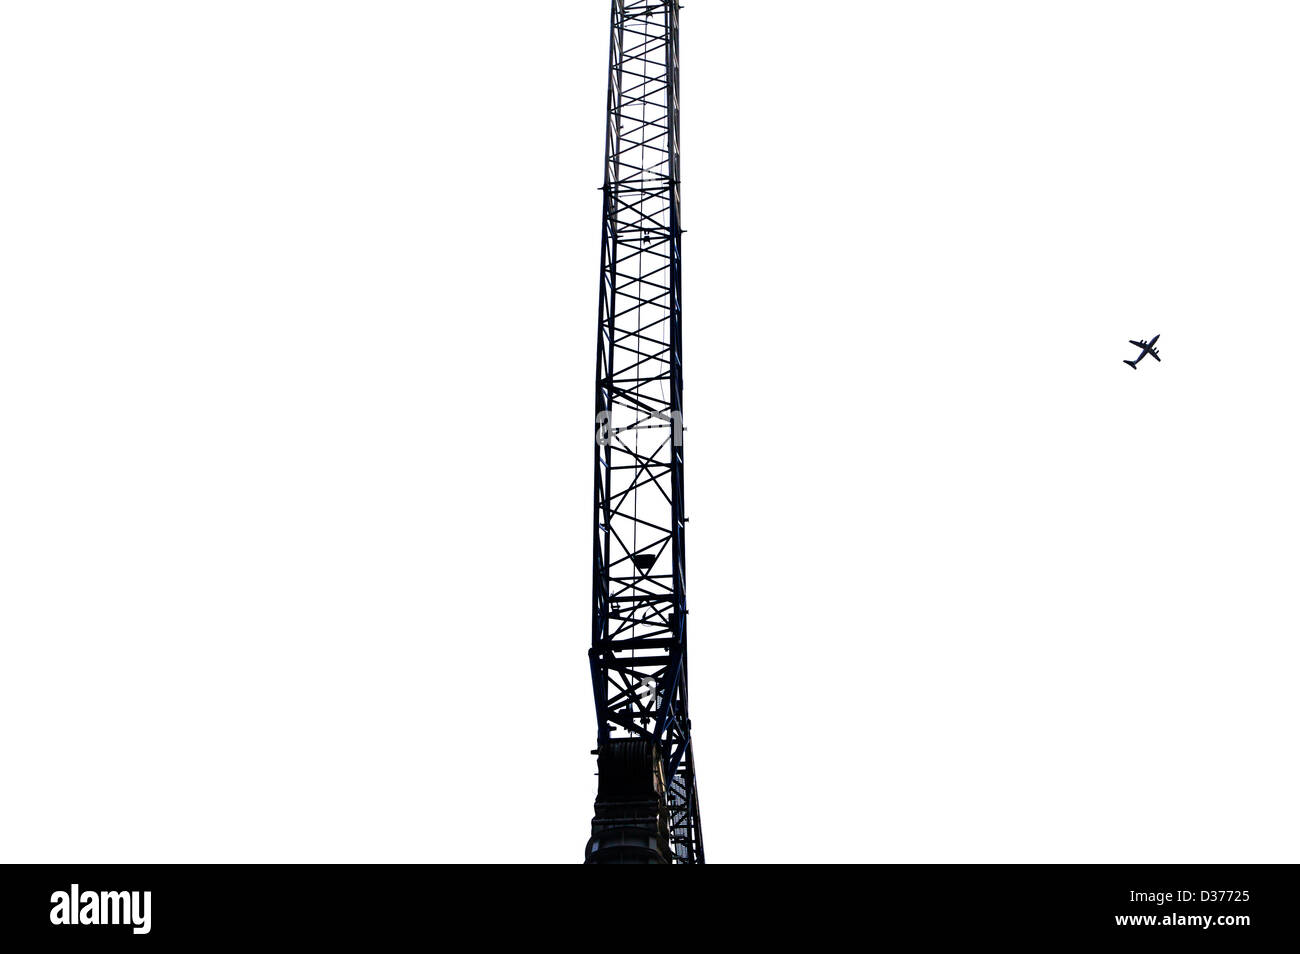 Crane against the sky with a plane in the sky in black and white Stock Photo